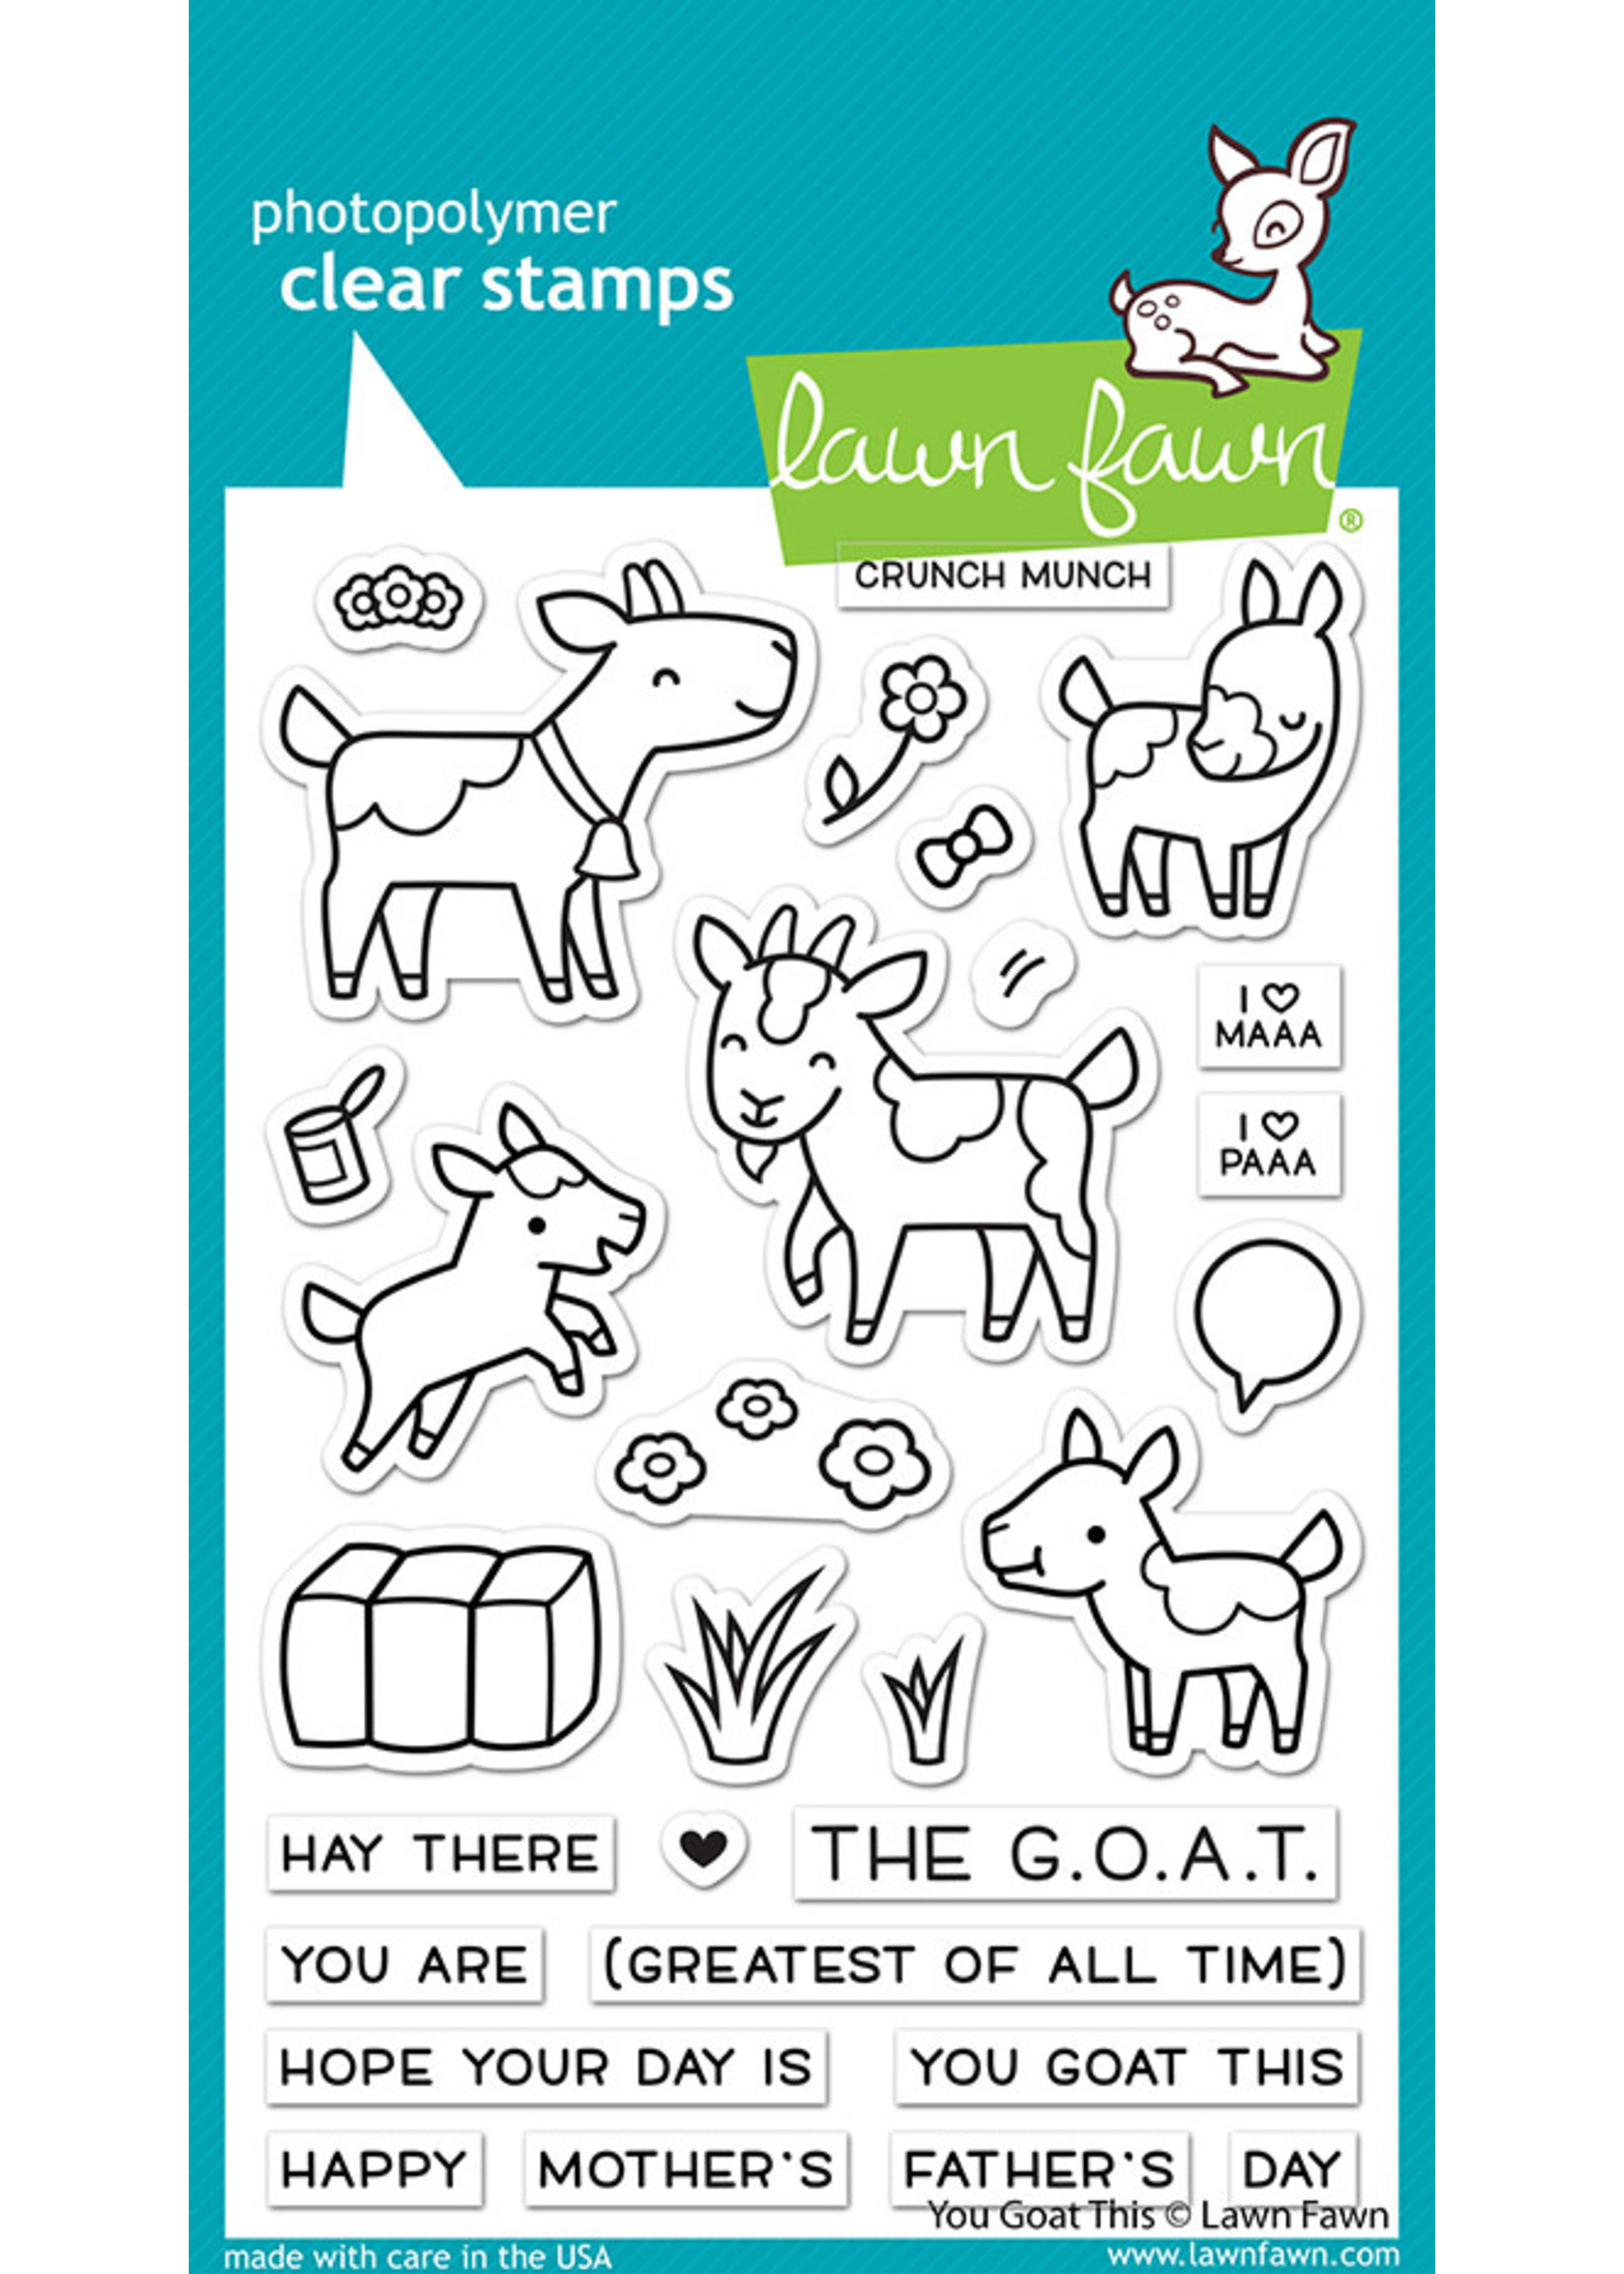 Lawn Fawn you goat this stamp